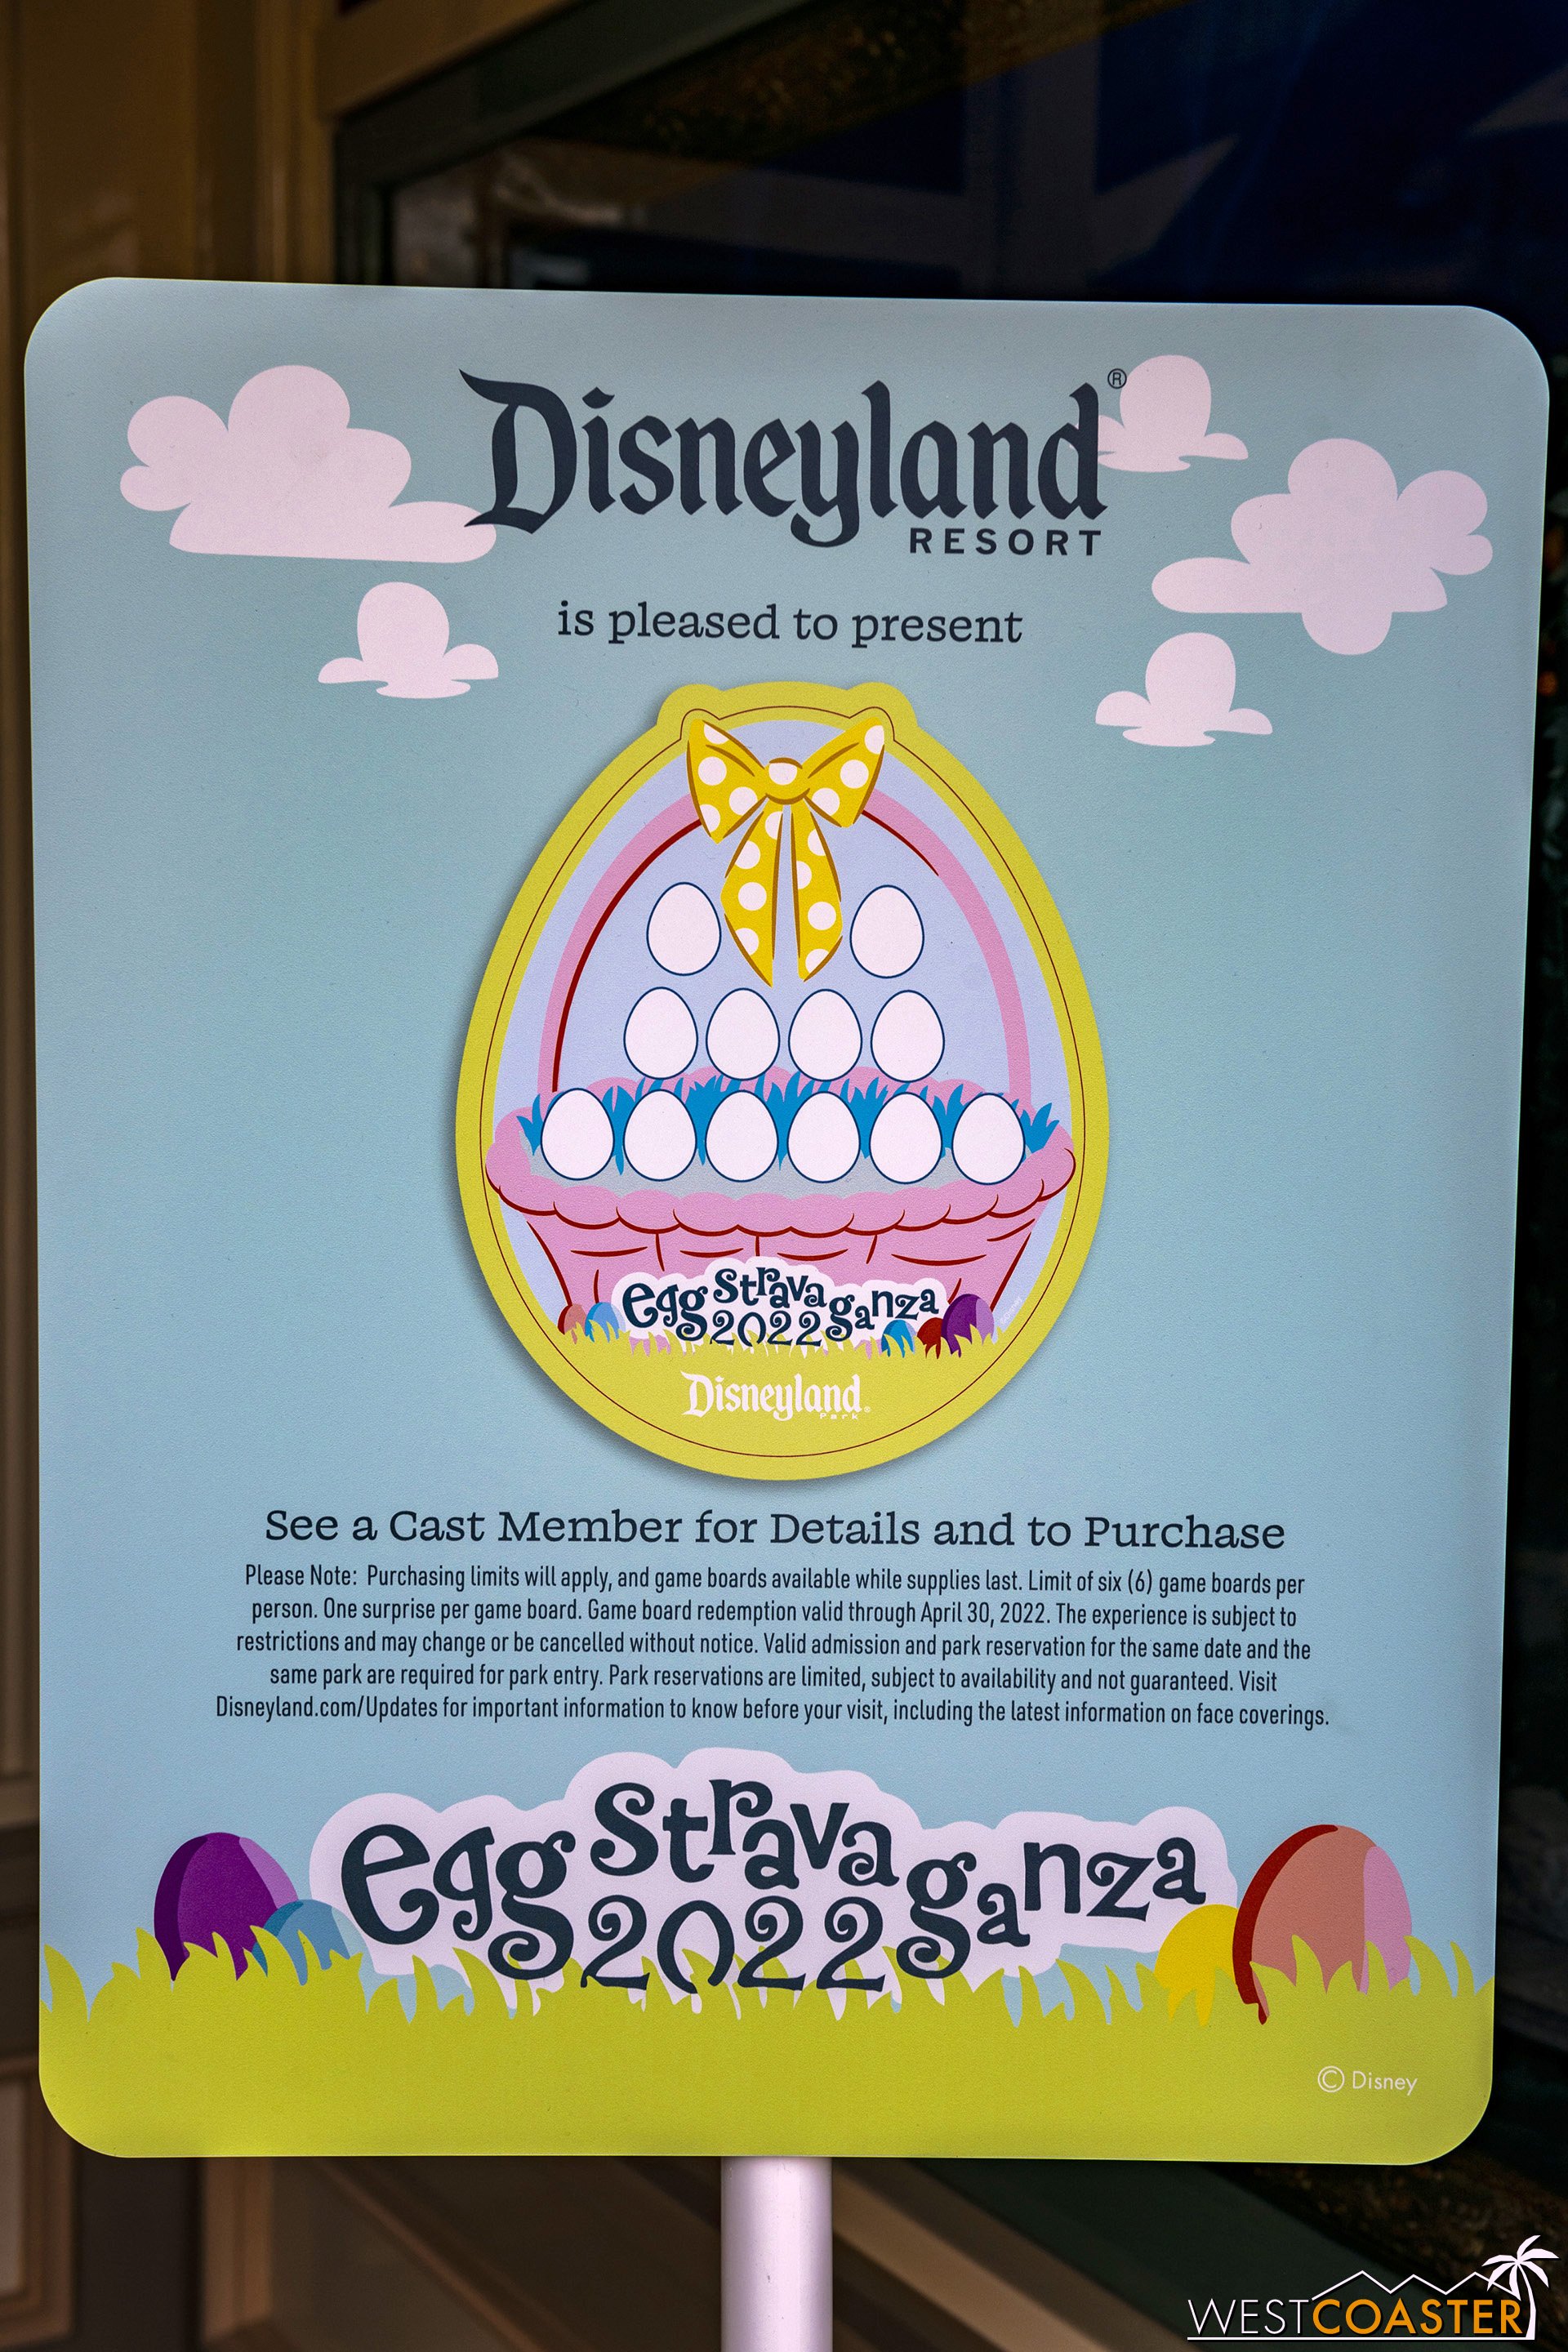  Disneyland’s annual Easter egg hunt is back after a couple years’ absence due to the Coronavirus. 